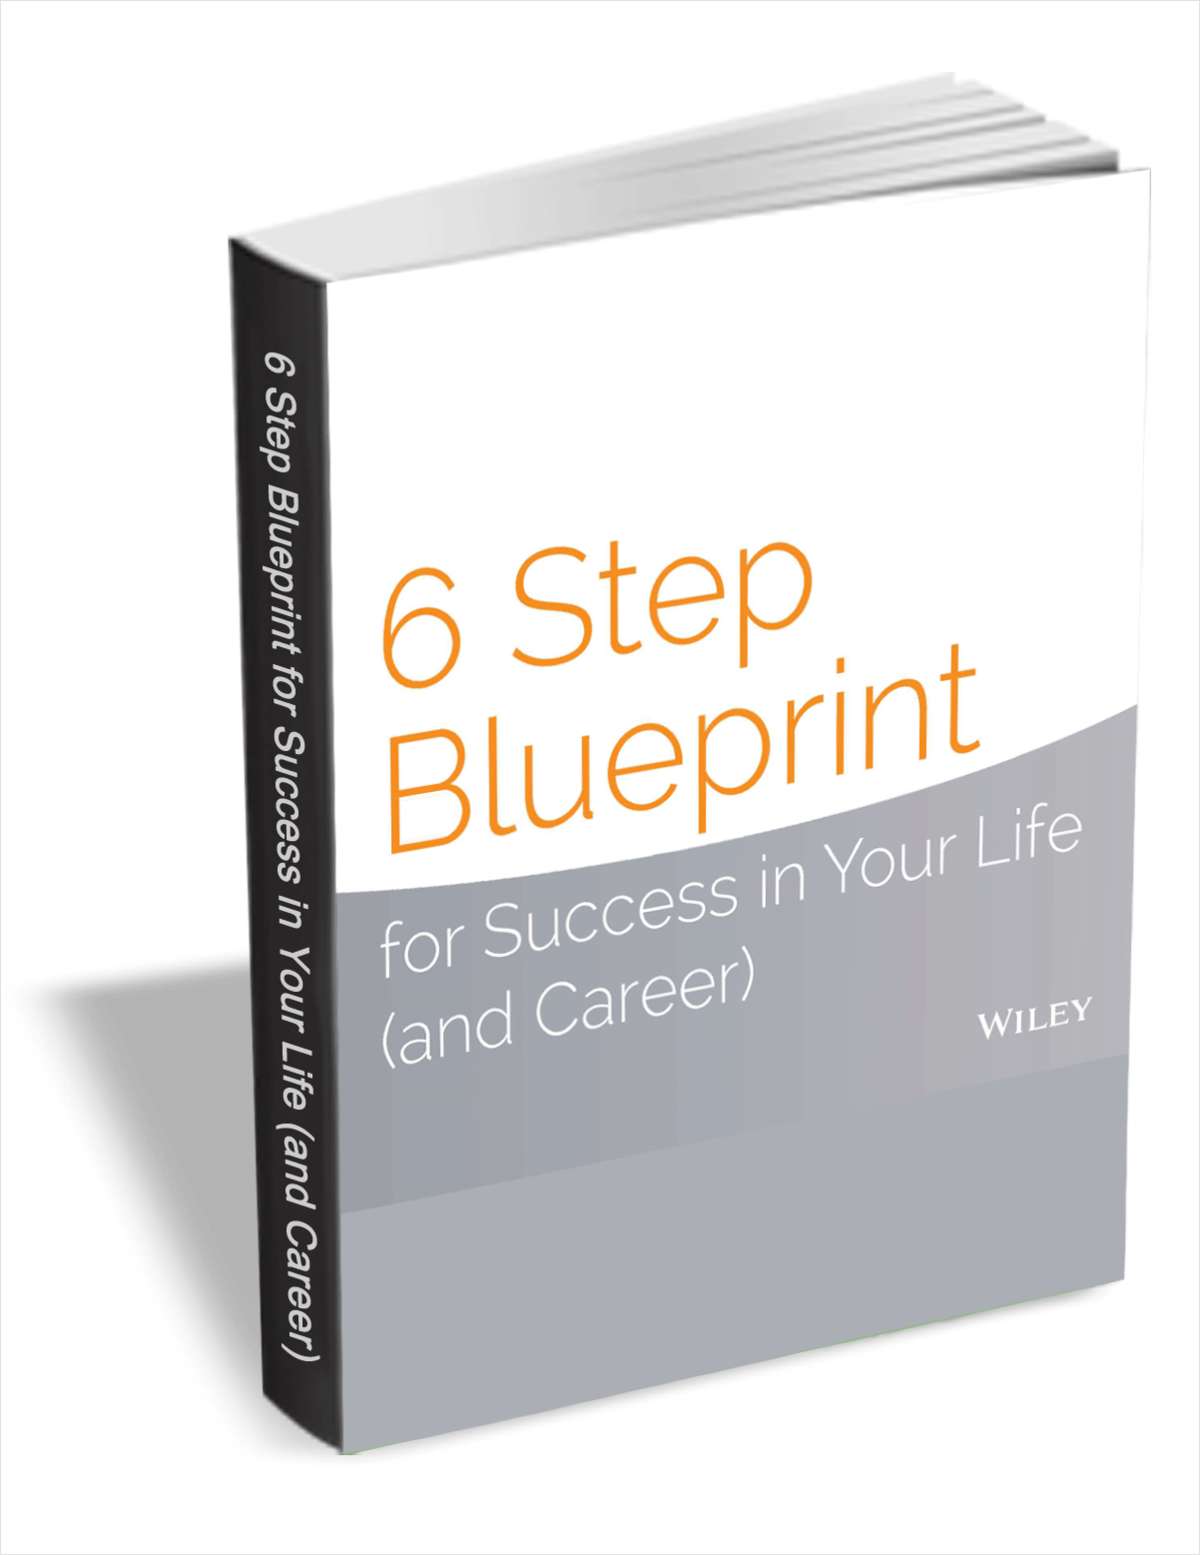 6 Step Blueprint for Success in Your Life (and Career)